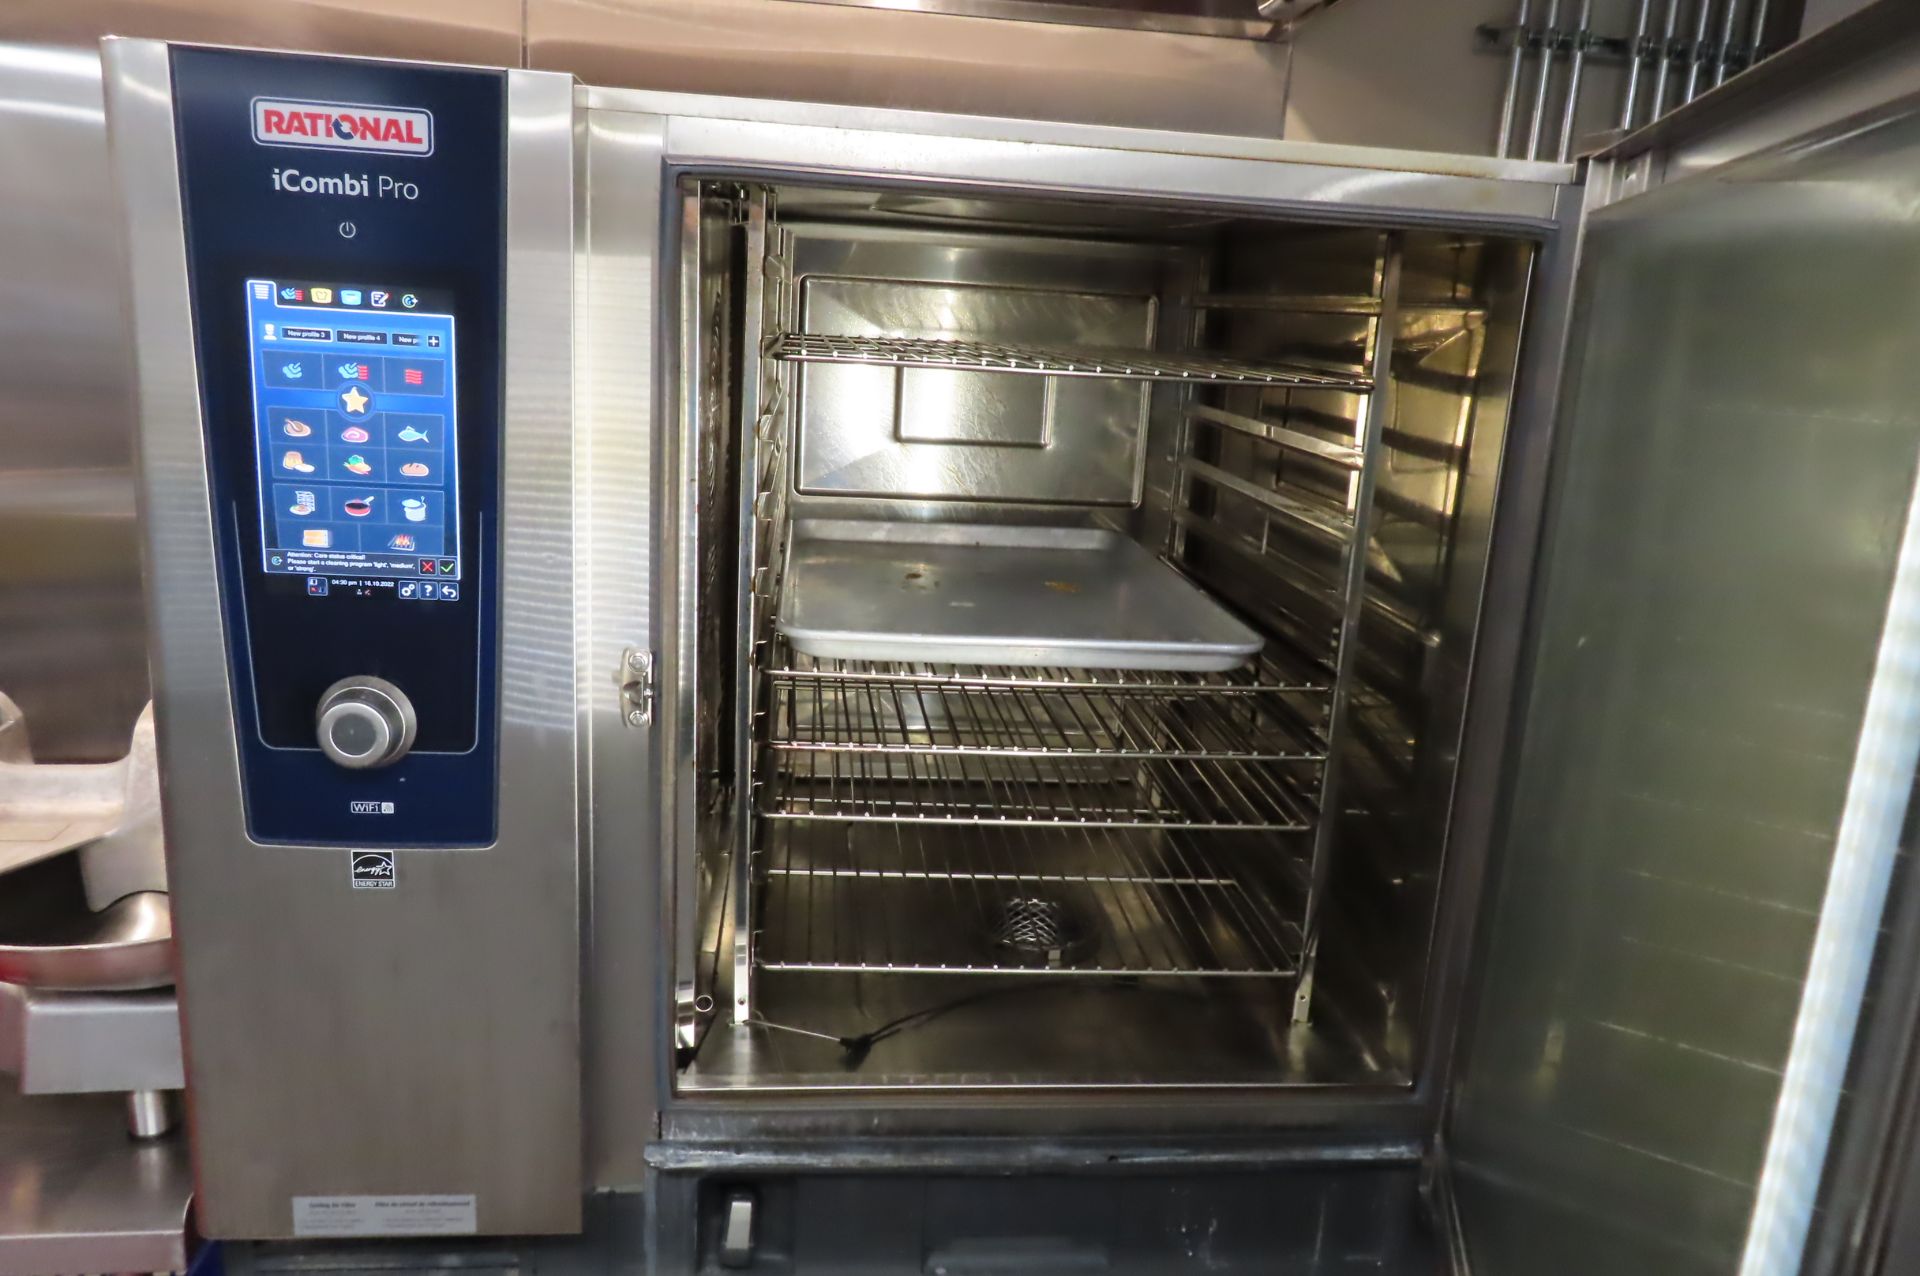 RATIONAL I LM100EG COMBI PRO OVEN, S/N G12SJ20032822376( MUST GO THRU WINDOW IN ROOM FOR REMOVAL) - Image 3 of 5